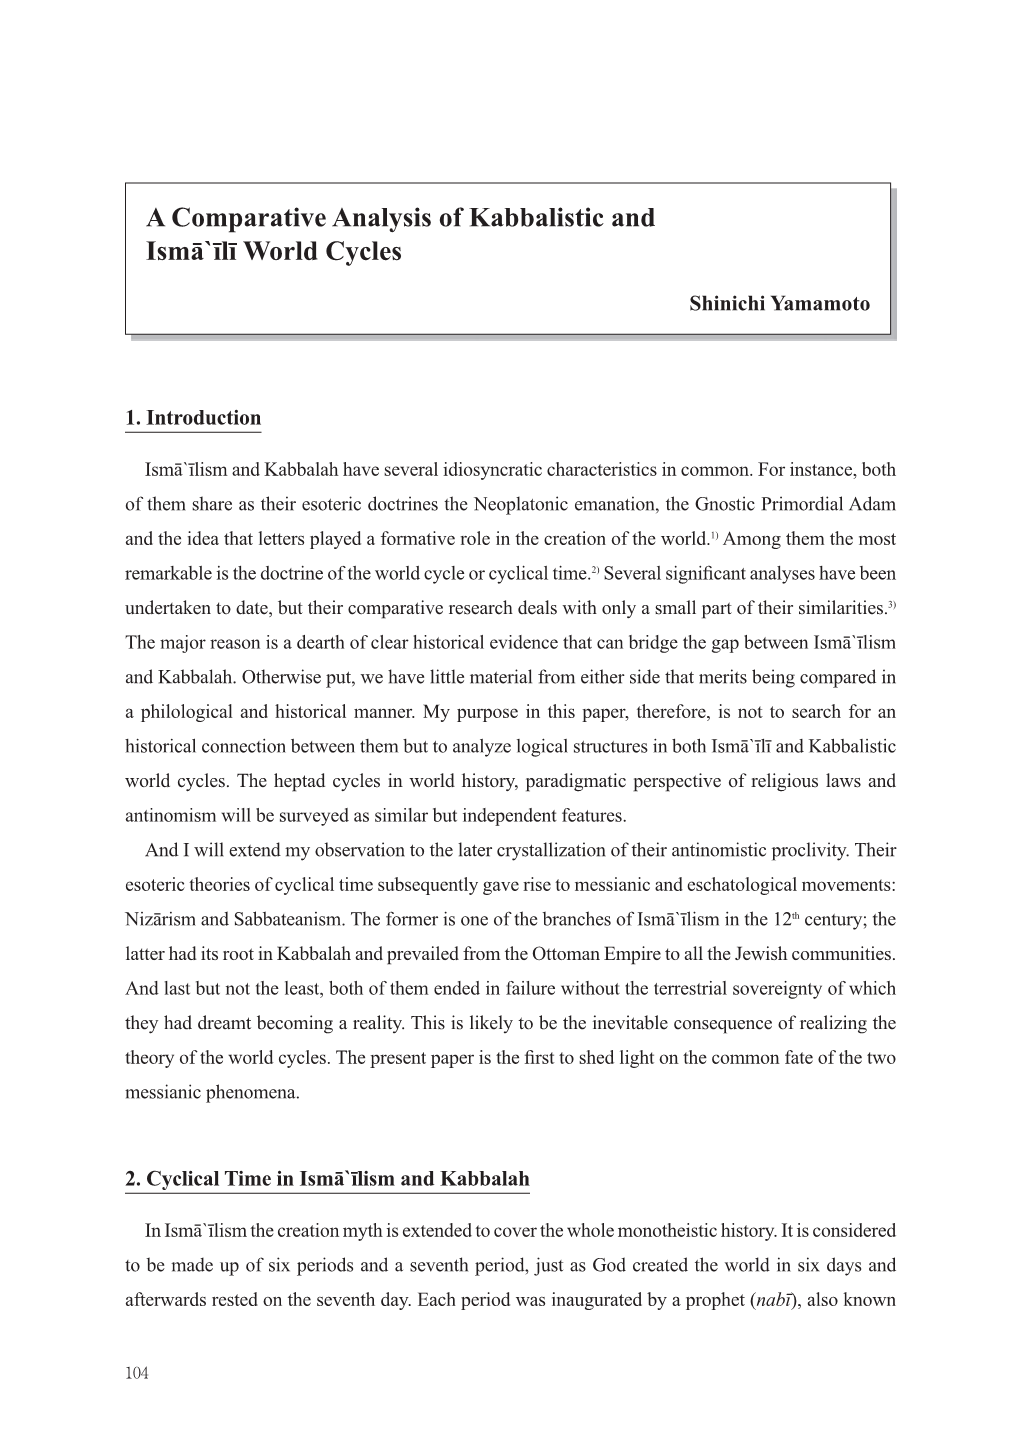 A Comparative Analysis of Kabbalistic and Ismā`Īlī World Cycles